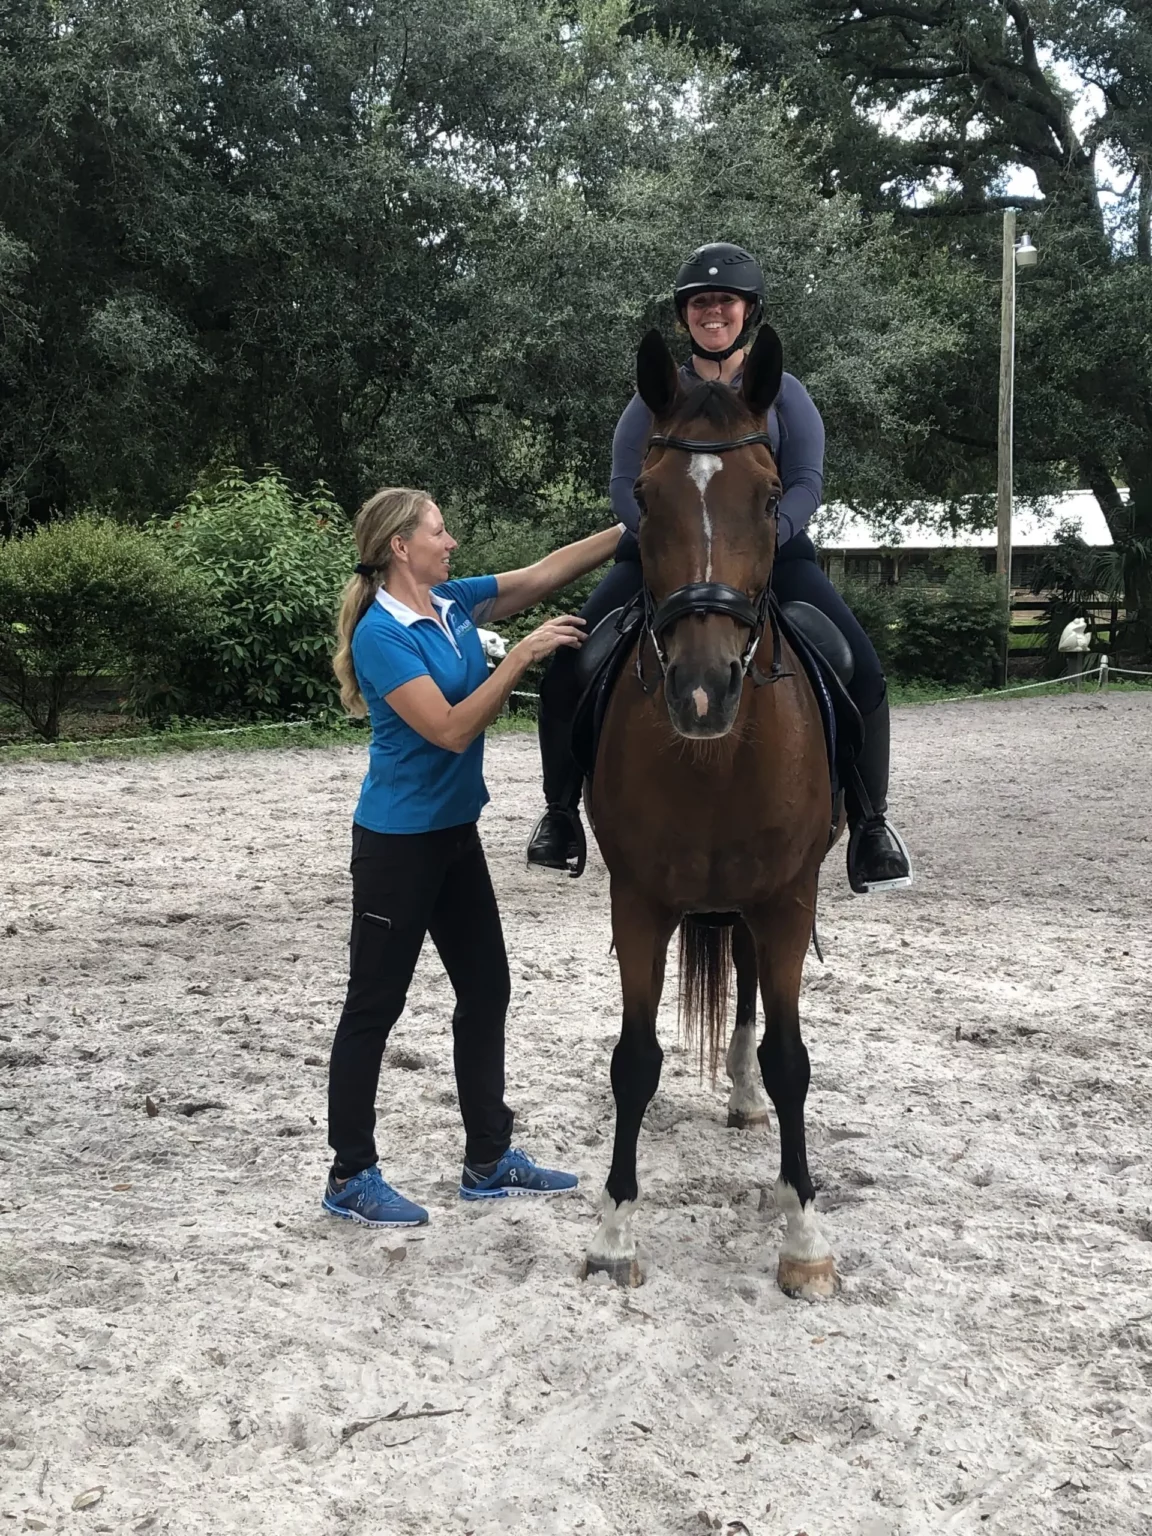 Centaur physical therapy can help do simple exercises throughout your day to fix your broken motor patterns and ultimately, you’ll be a good functional rider